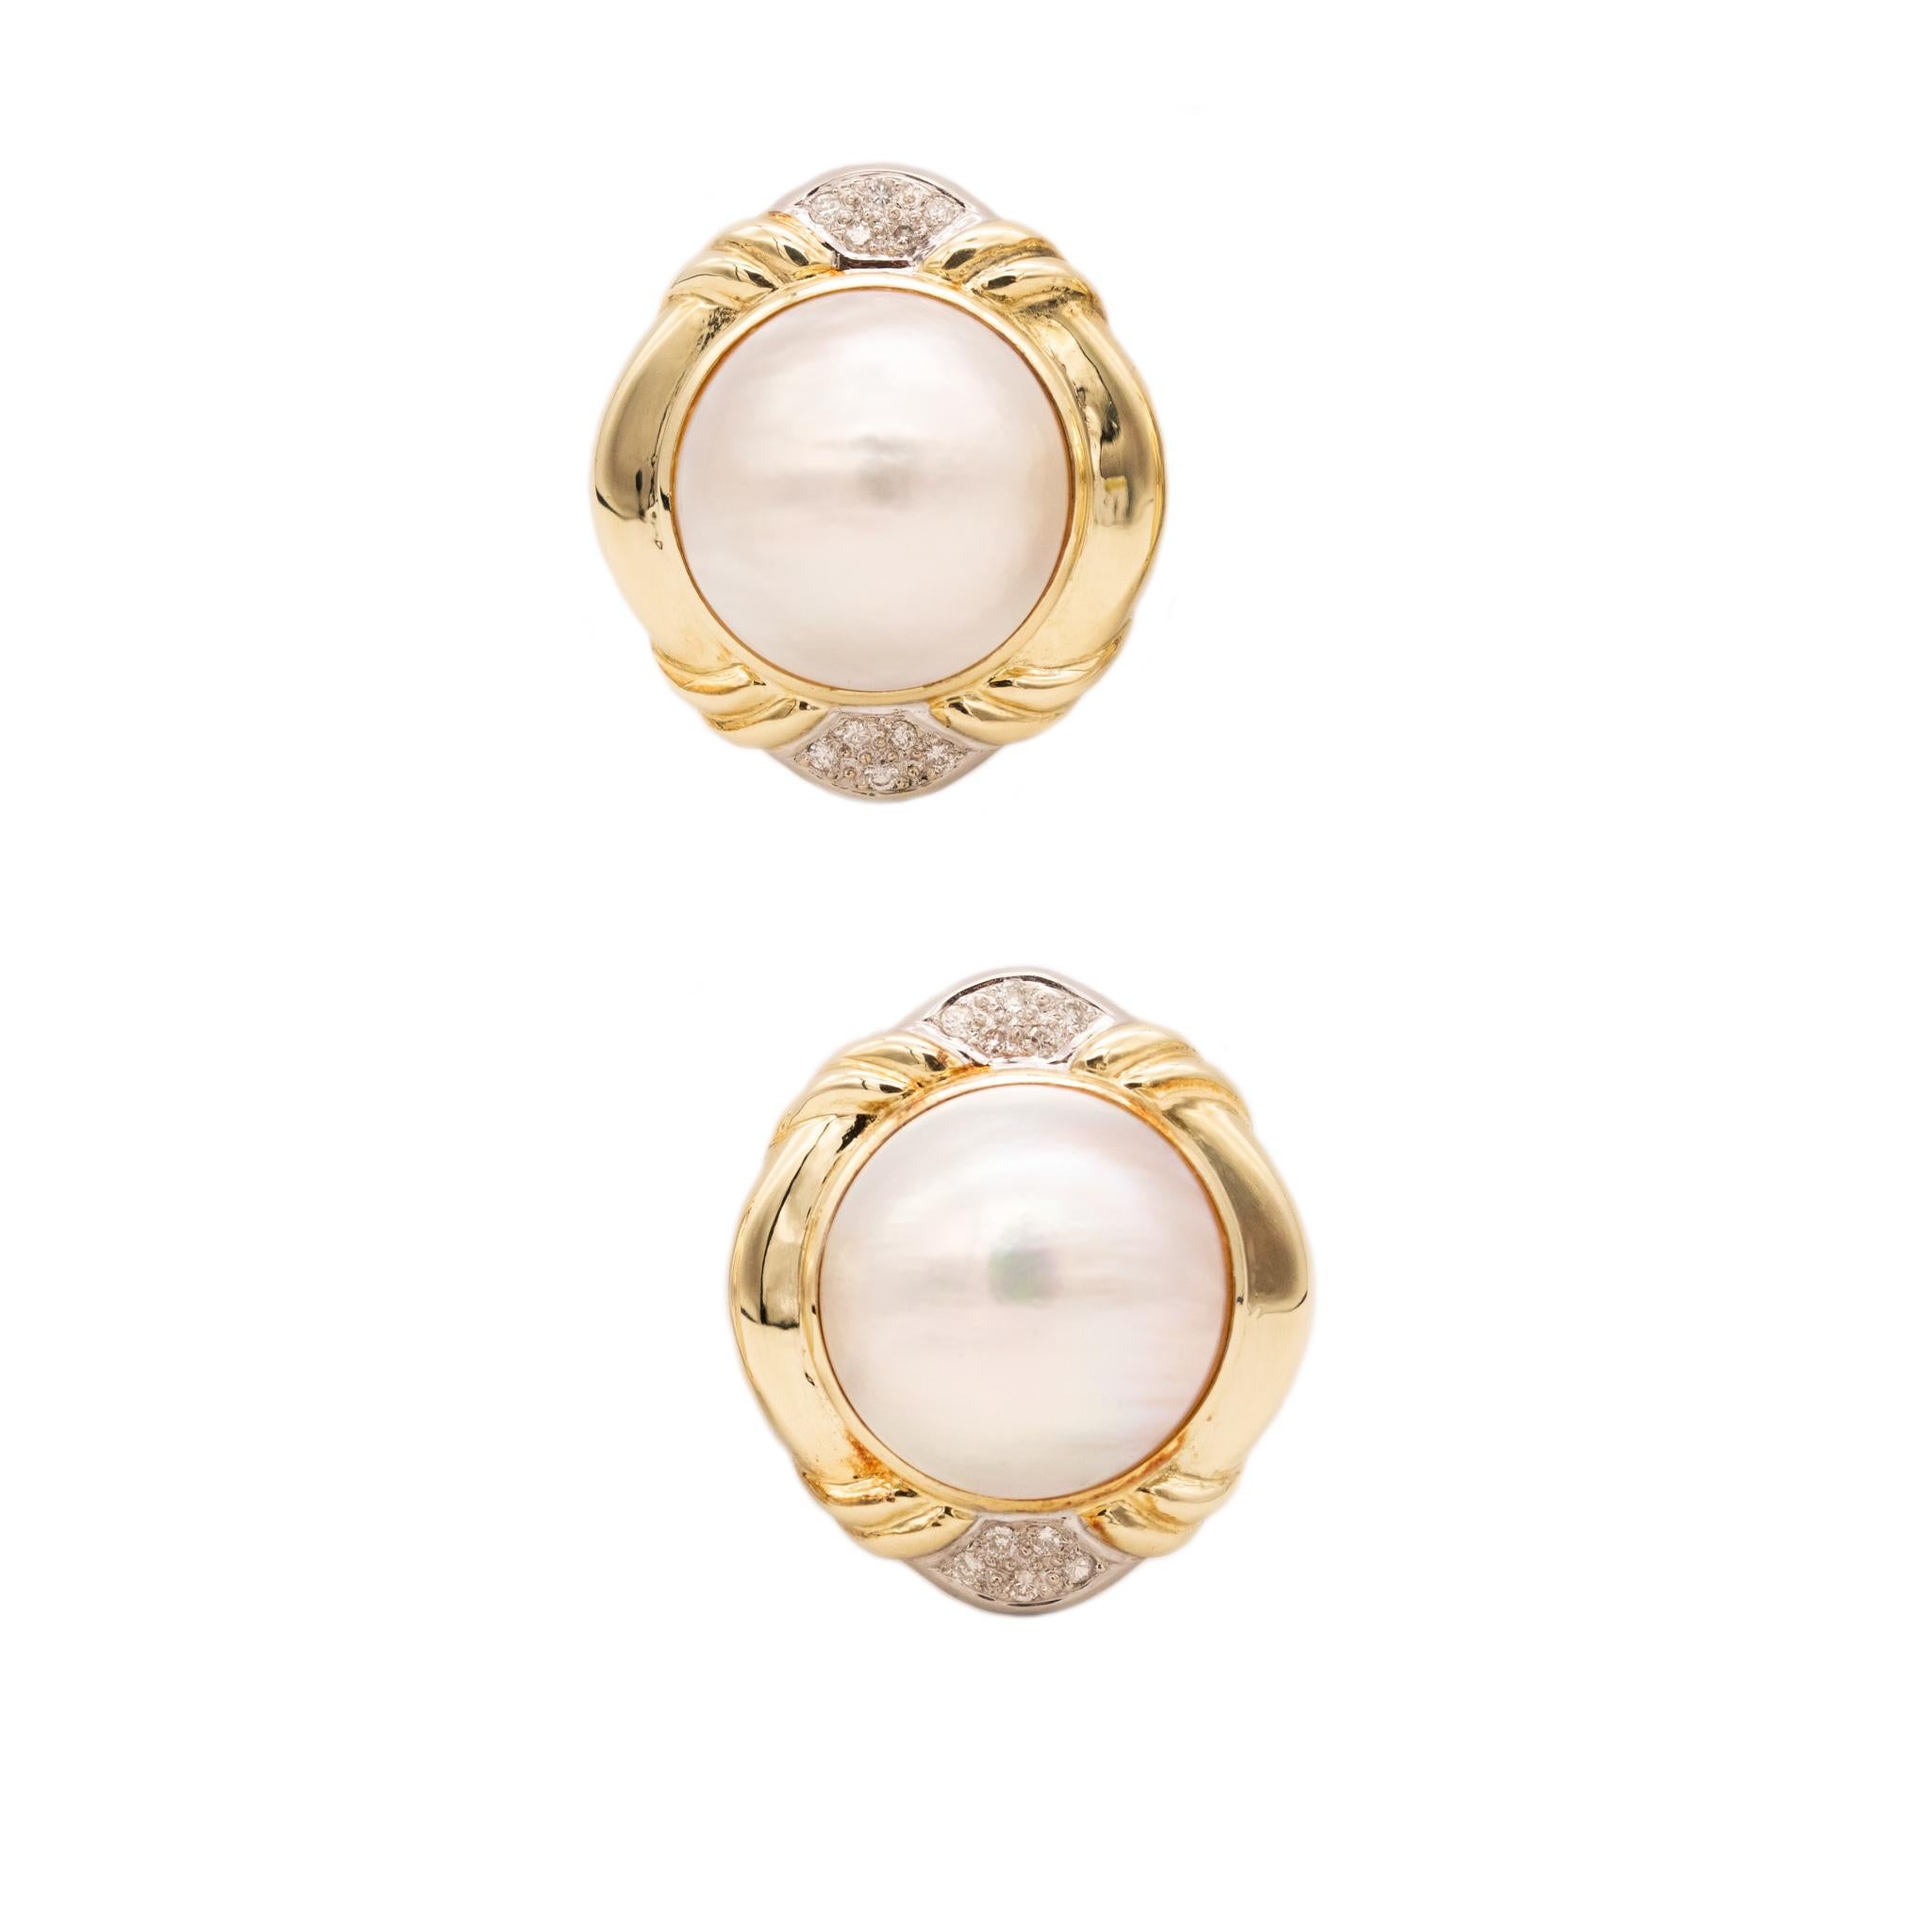 A pair of earrings with Mabe Pearls and diamonds.

Modern over-sized pieces crafted in Italy in solid 14 karats yellow gold and suited with posts (Removable) for pierced ears and French omega backs for fastening clips.

They are bezel set, with a